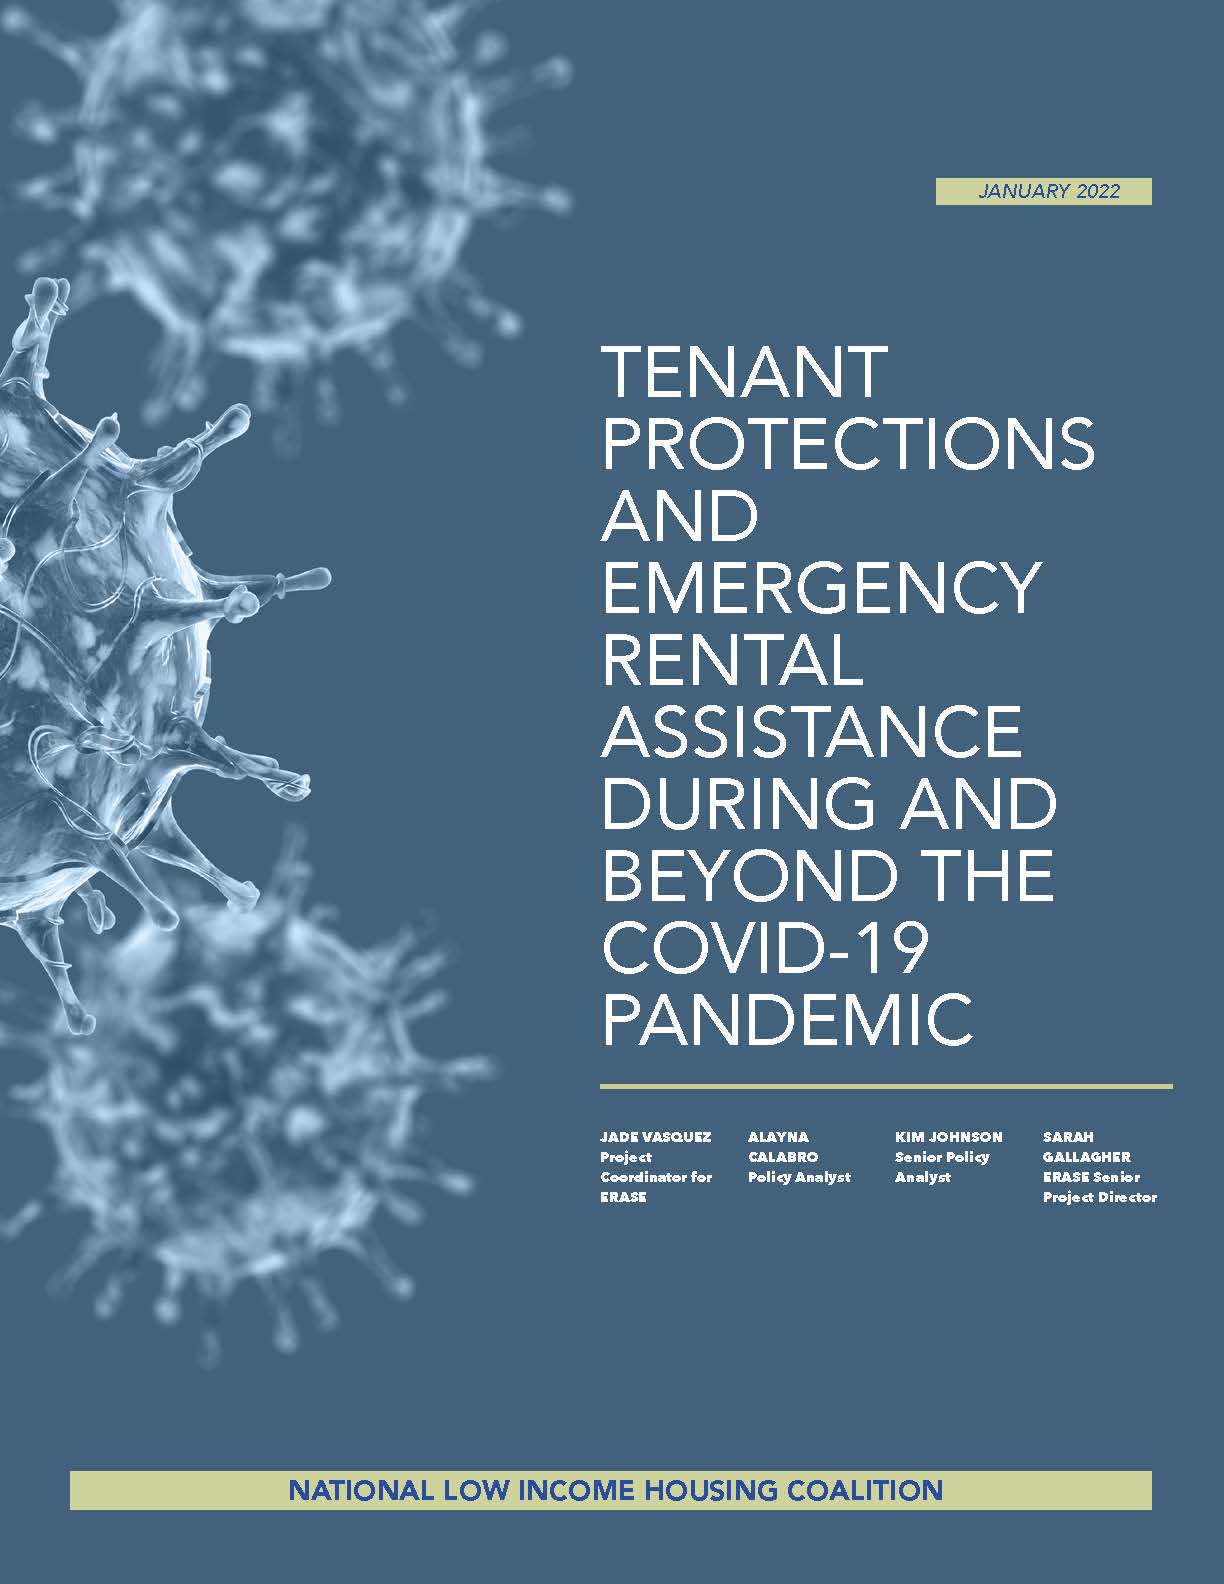 Cover_Tenant-Protections_Emergency-Rental-Assistance-during_beyond_COVID-19_Pandemic.jpg